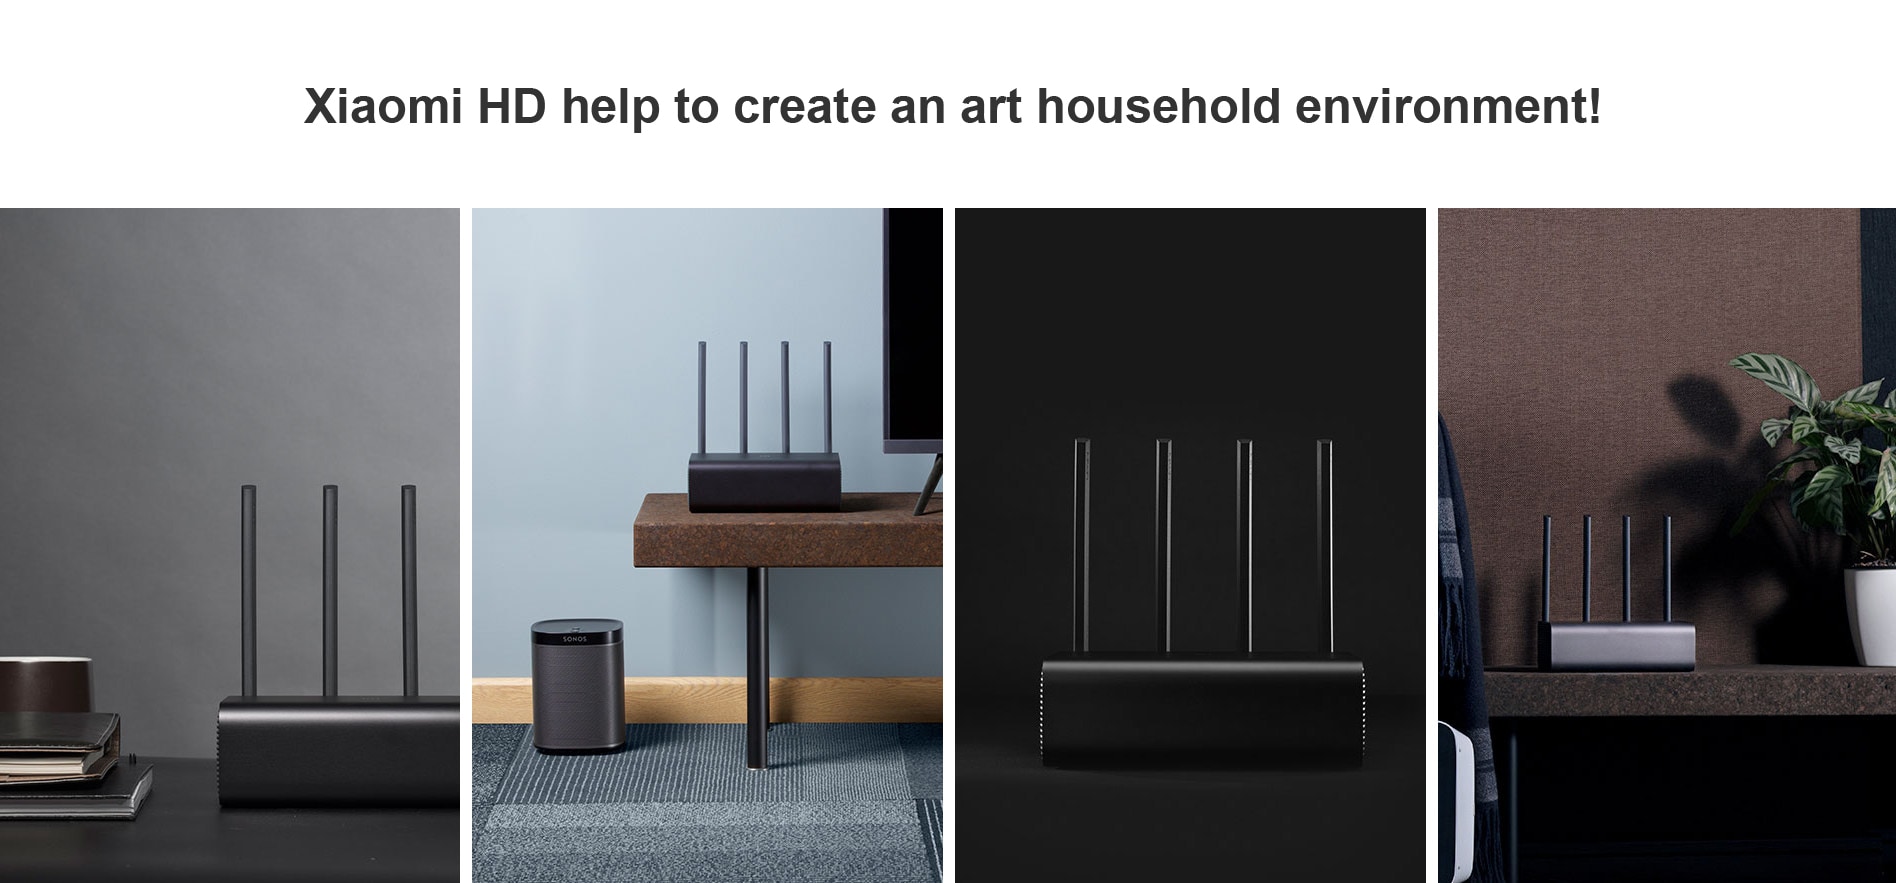 Xiaomi Mi R3P 2600Mbps Smart Wireless Router Pro 4 Antenna Dual-band 2.4GHz + 5.0GHz WiFi Network Device- Gray Pro